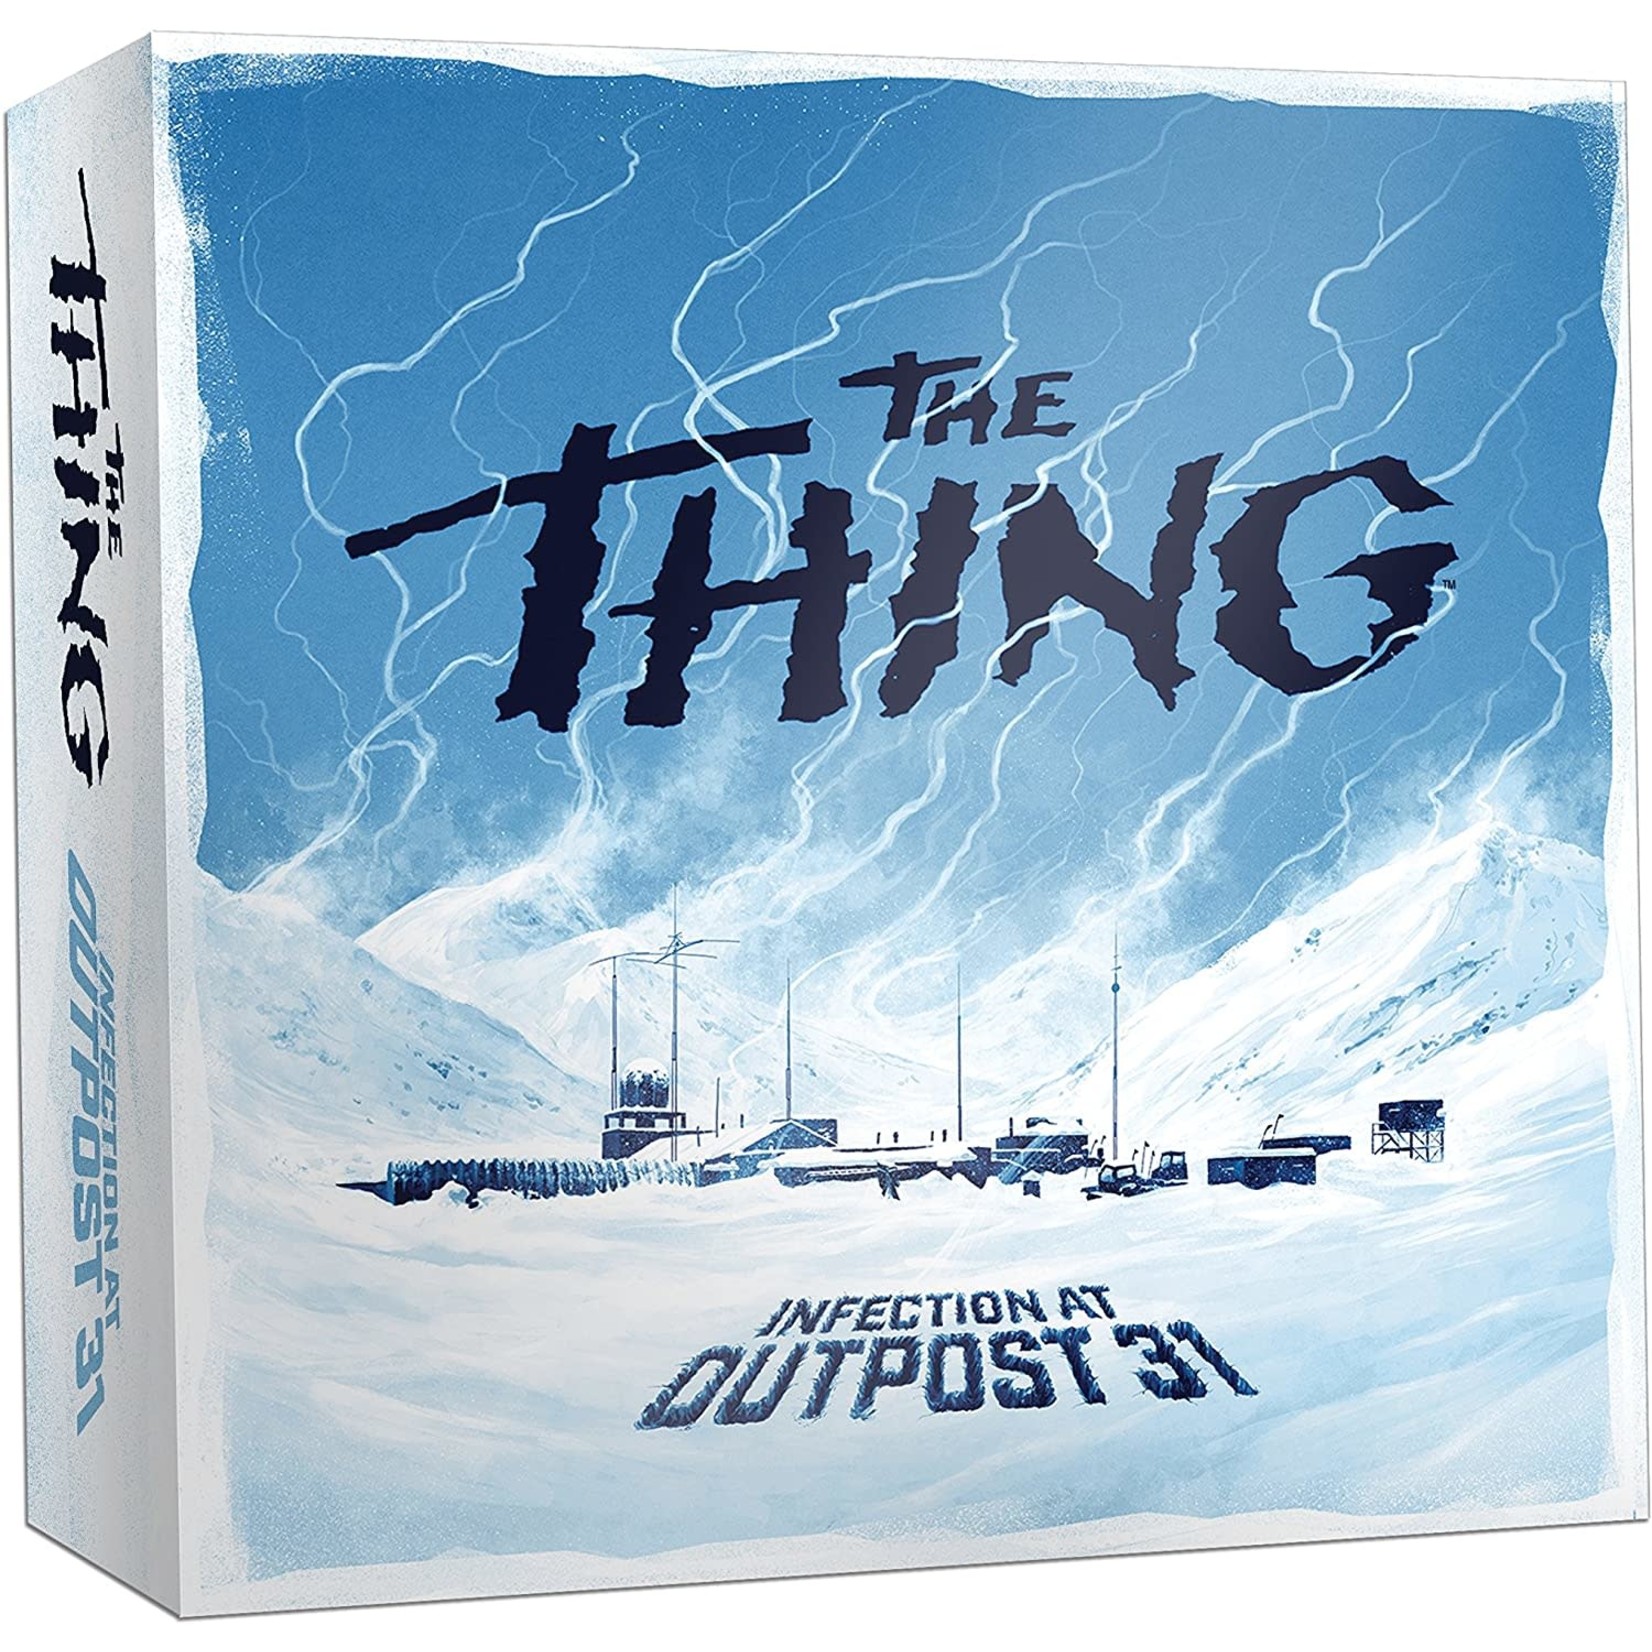 The Op The Thing: Infection at Outpost 31